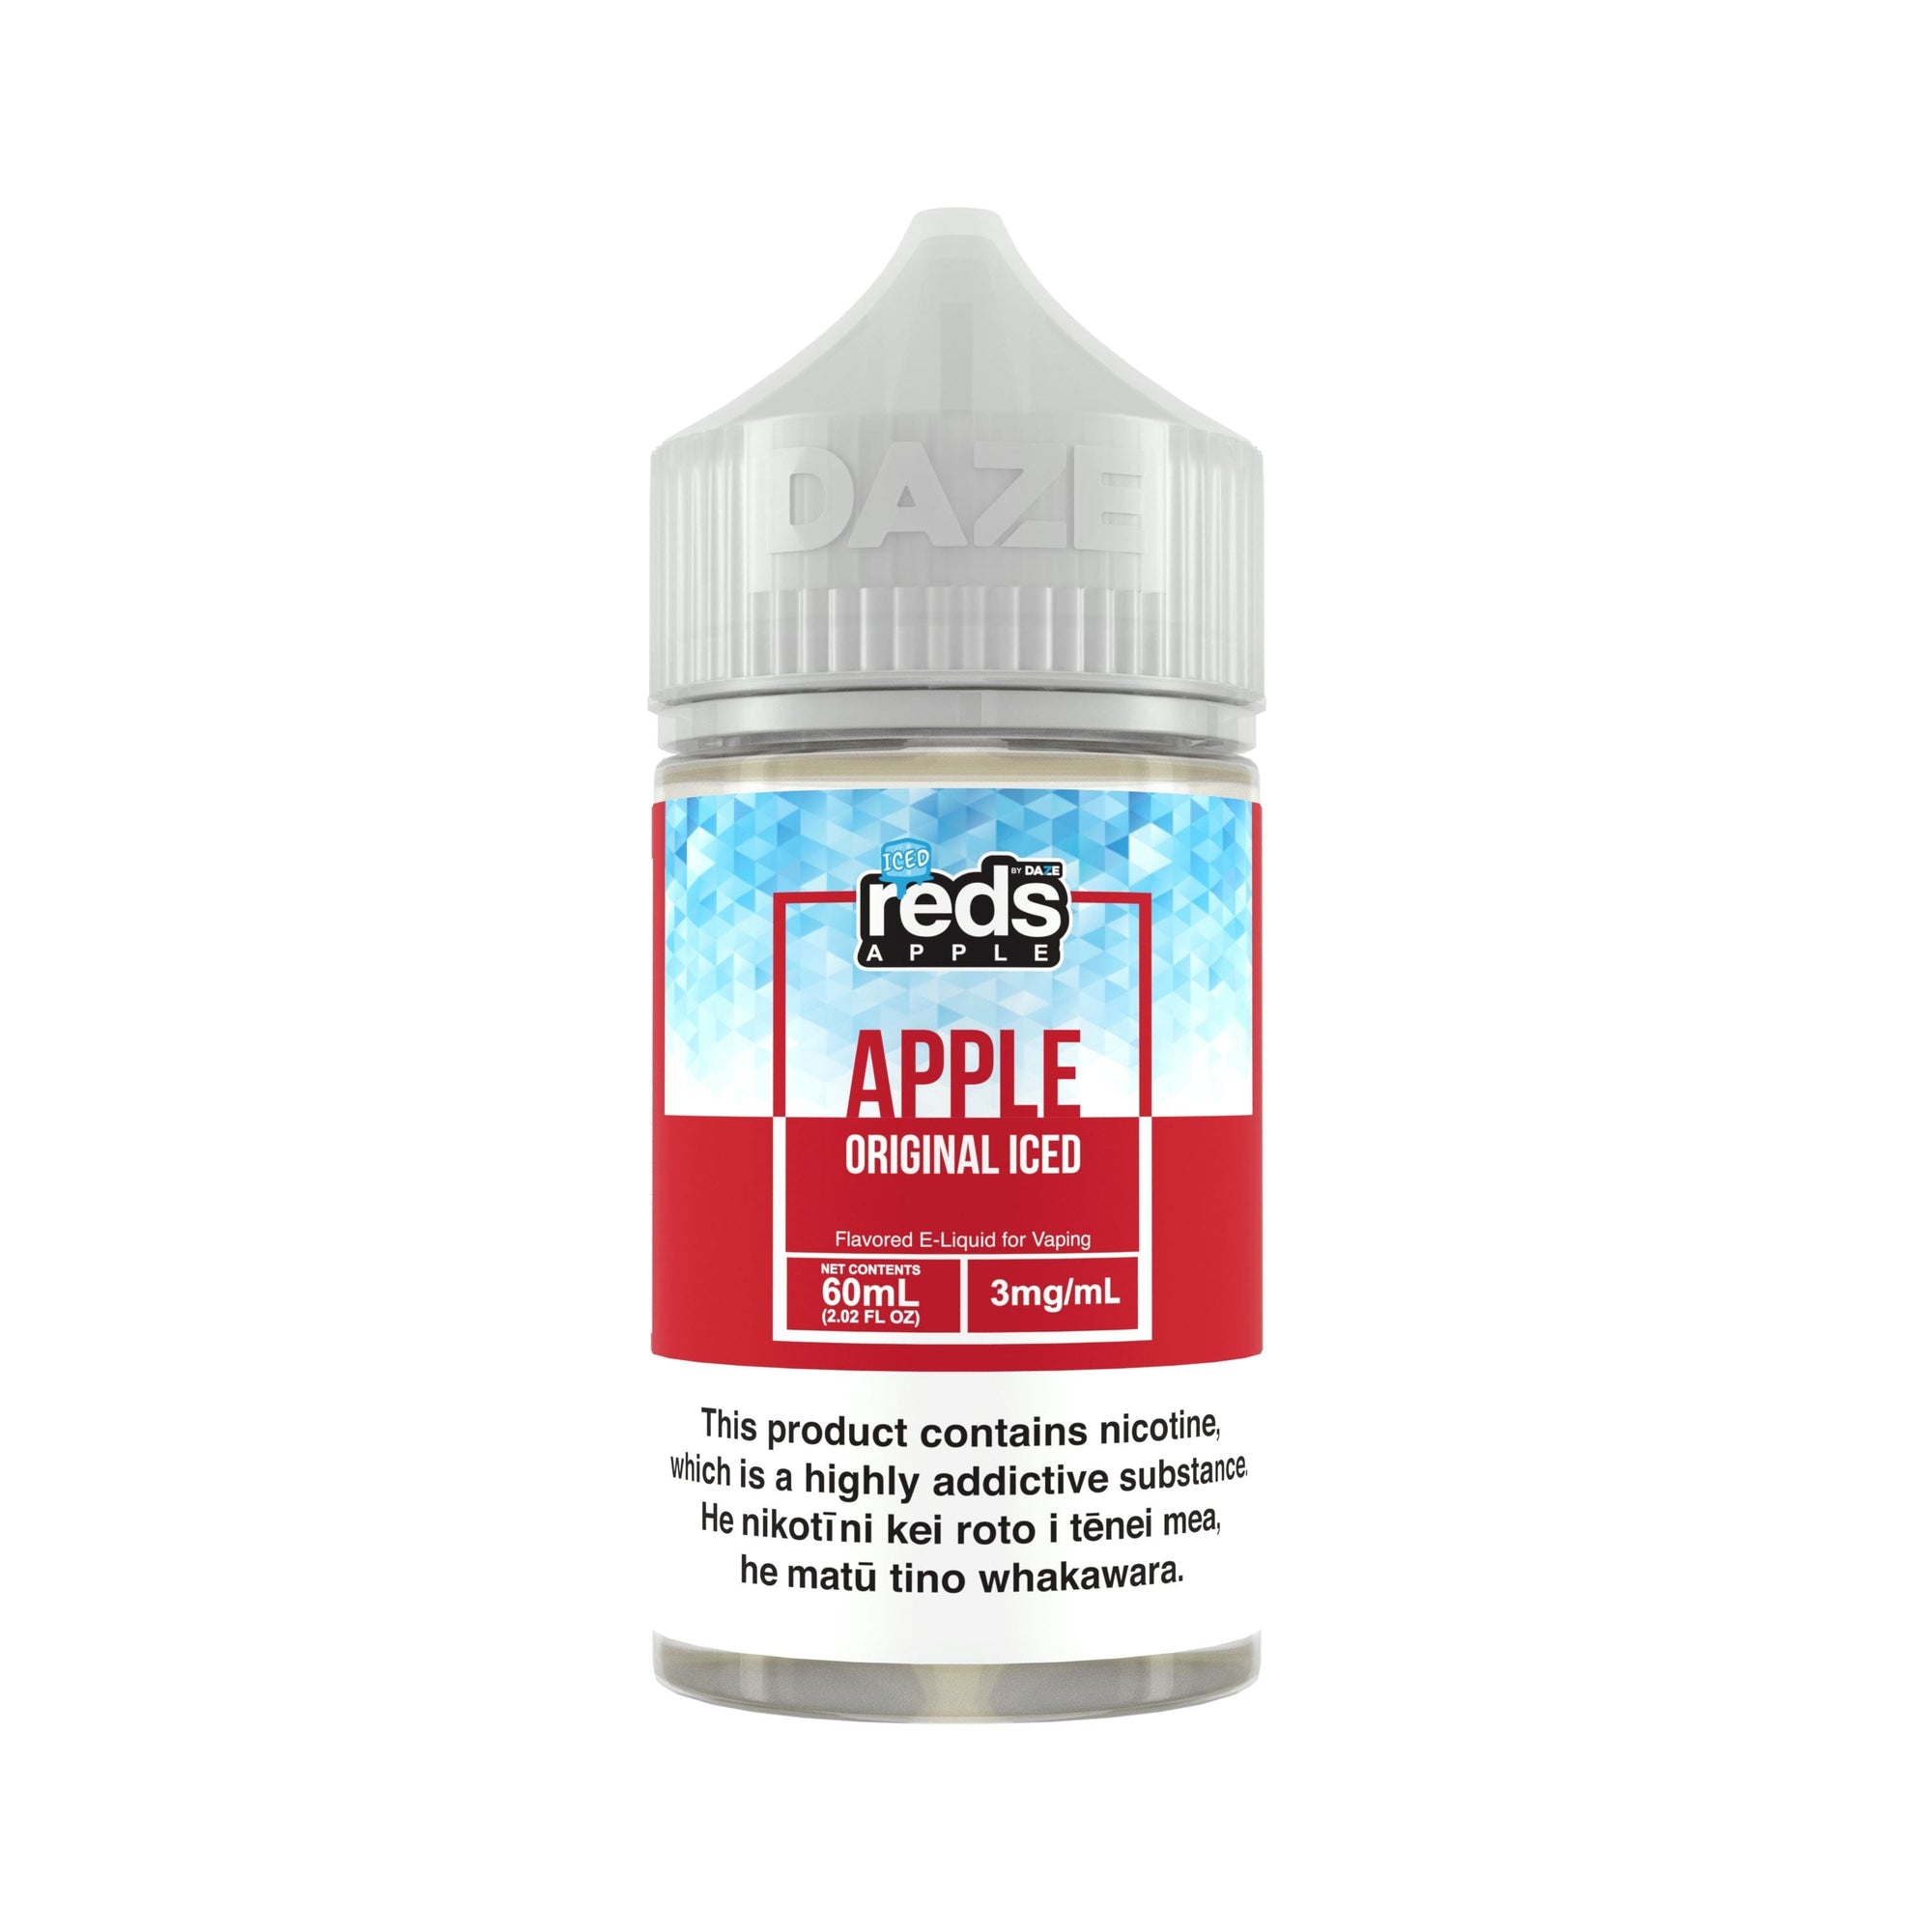 SALE Reds Apple - Reds Apple Iced - Vapoureyes